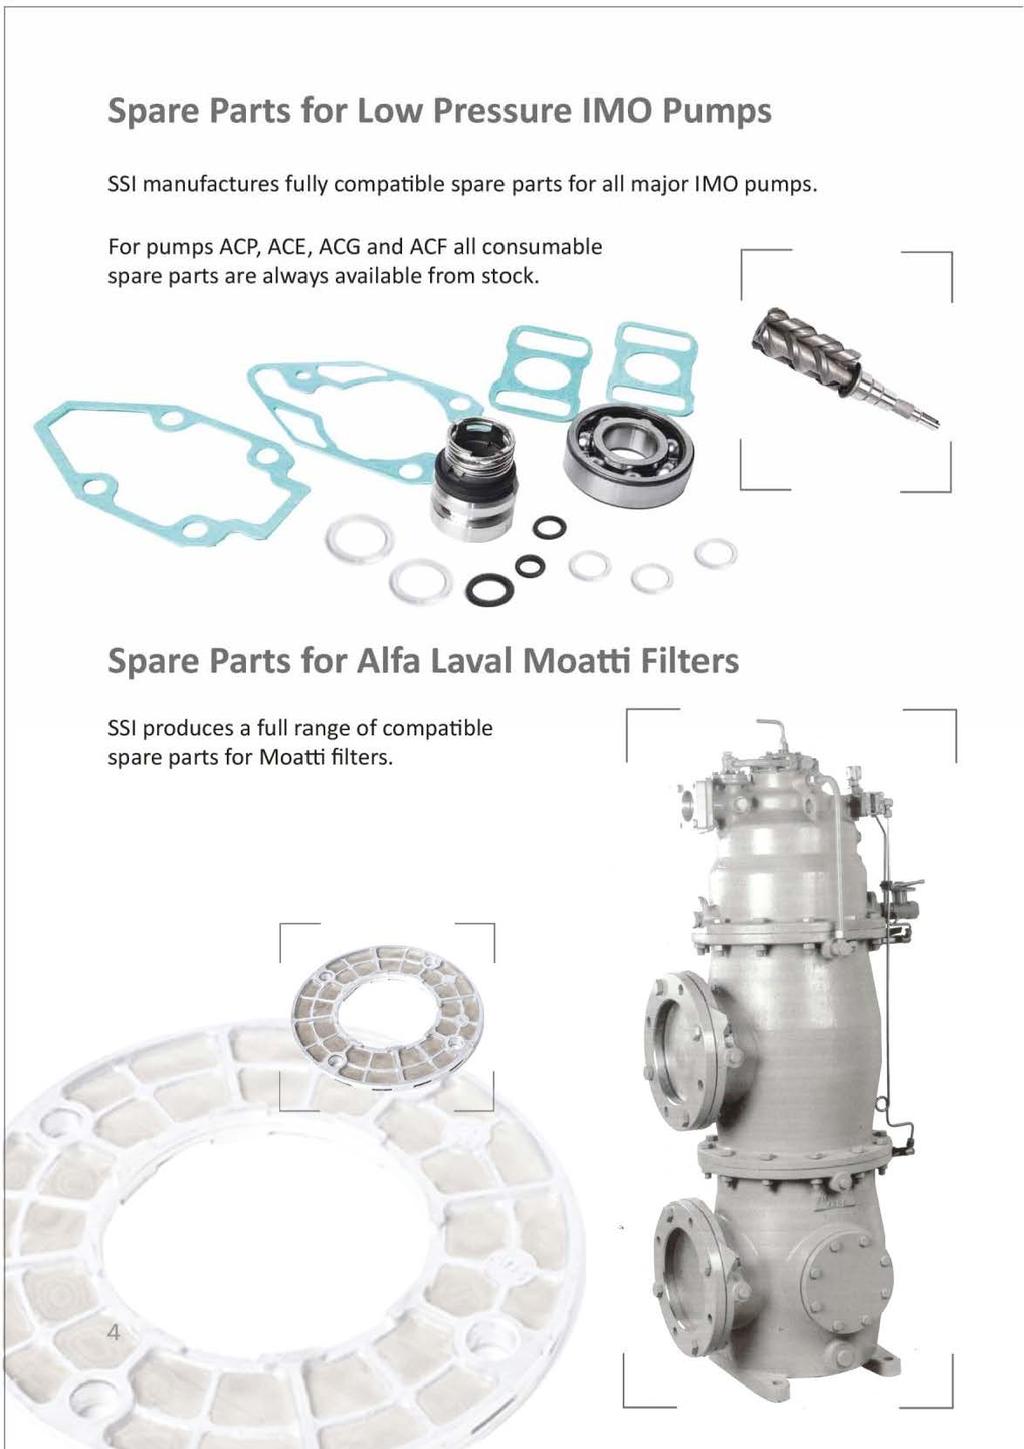 / Spare Parts for Low Pressure IMO Pumps SSI manufactures fully compatible spare parts for all major I MO pumps.